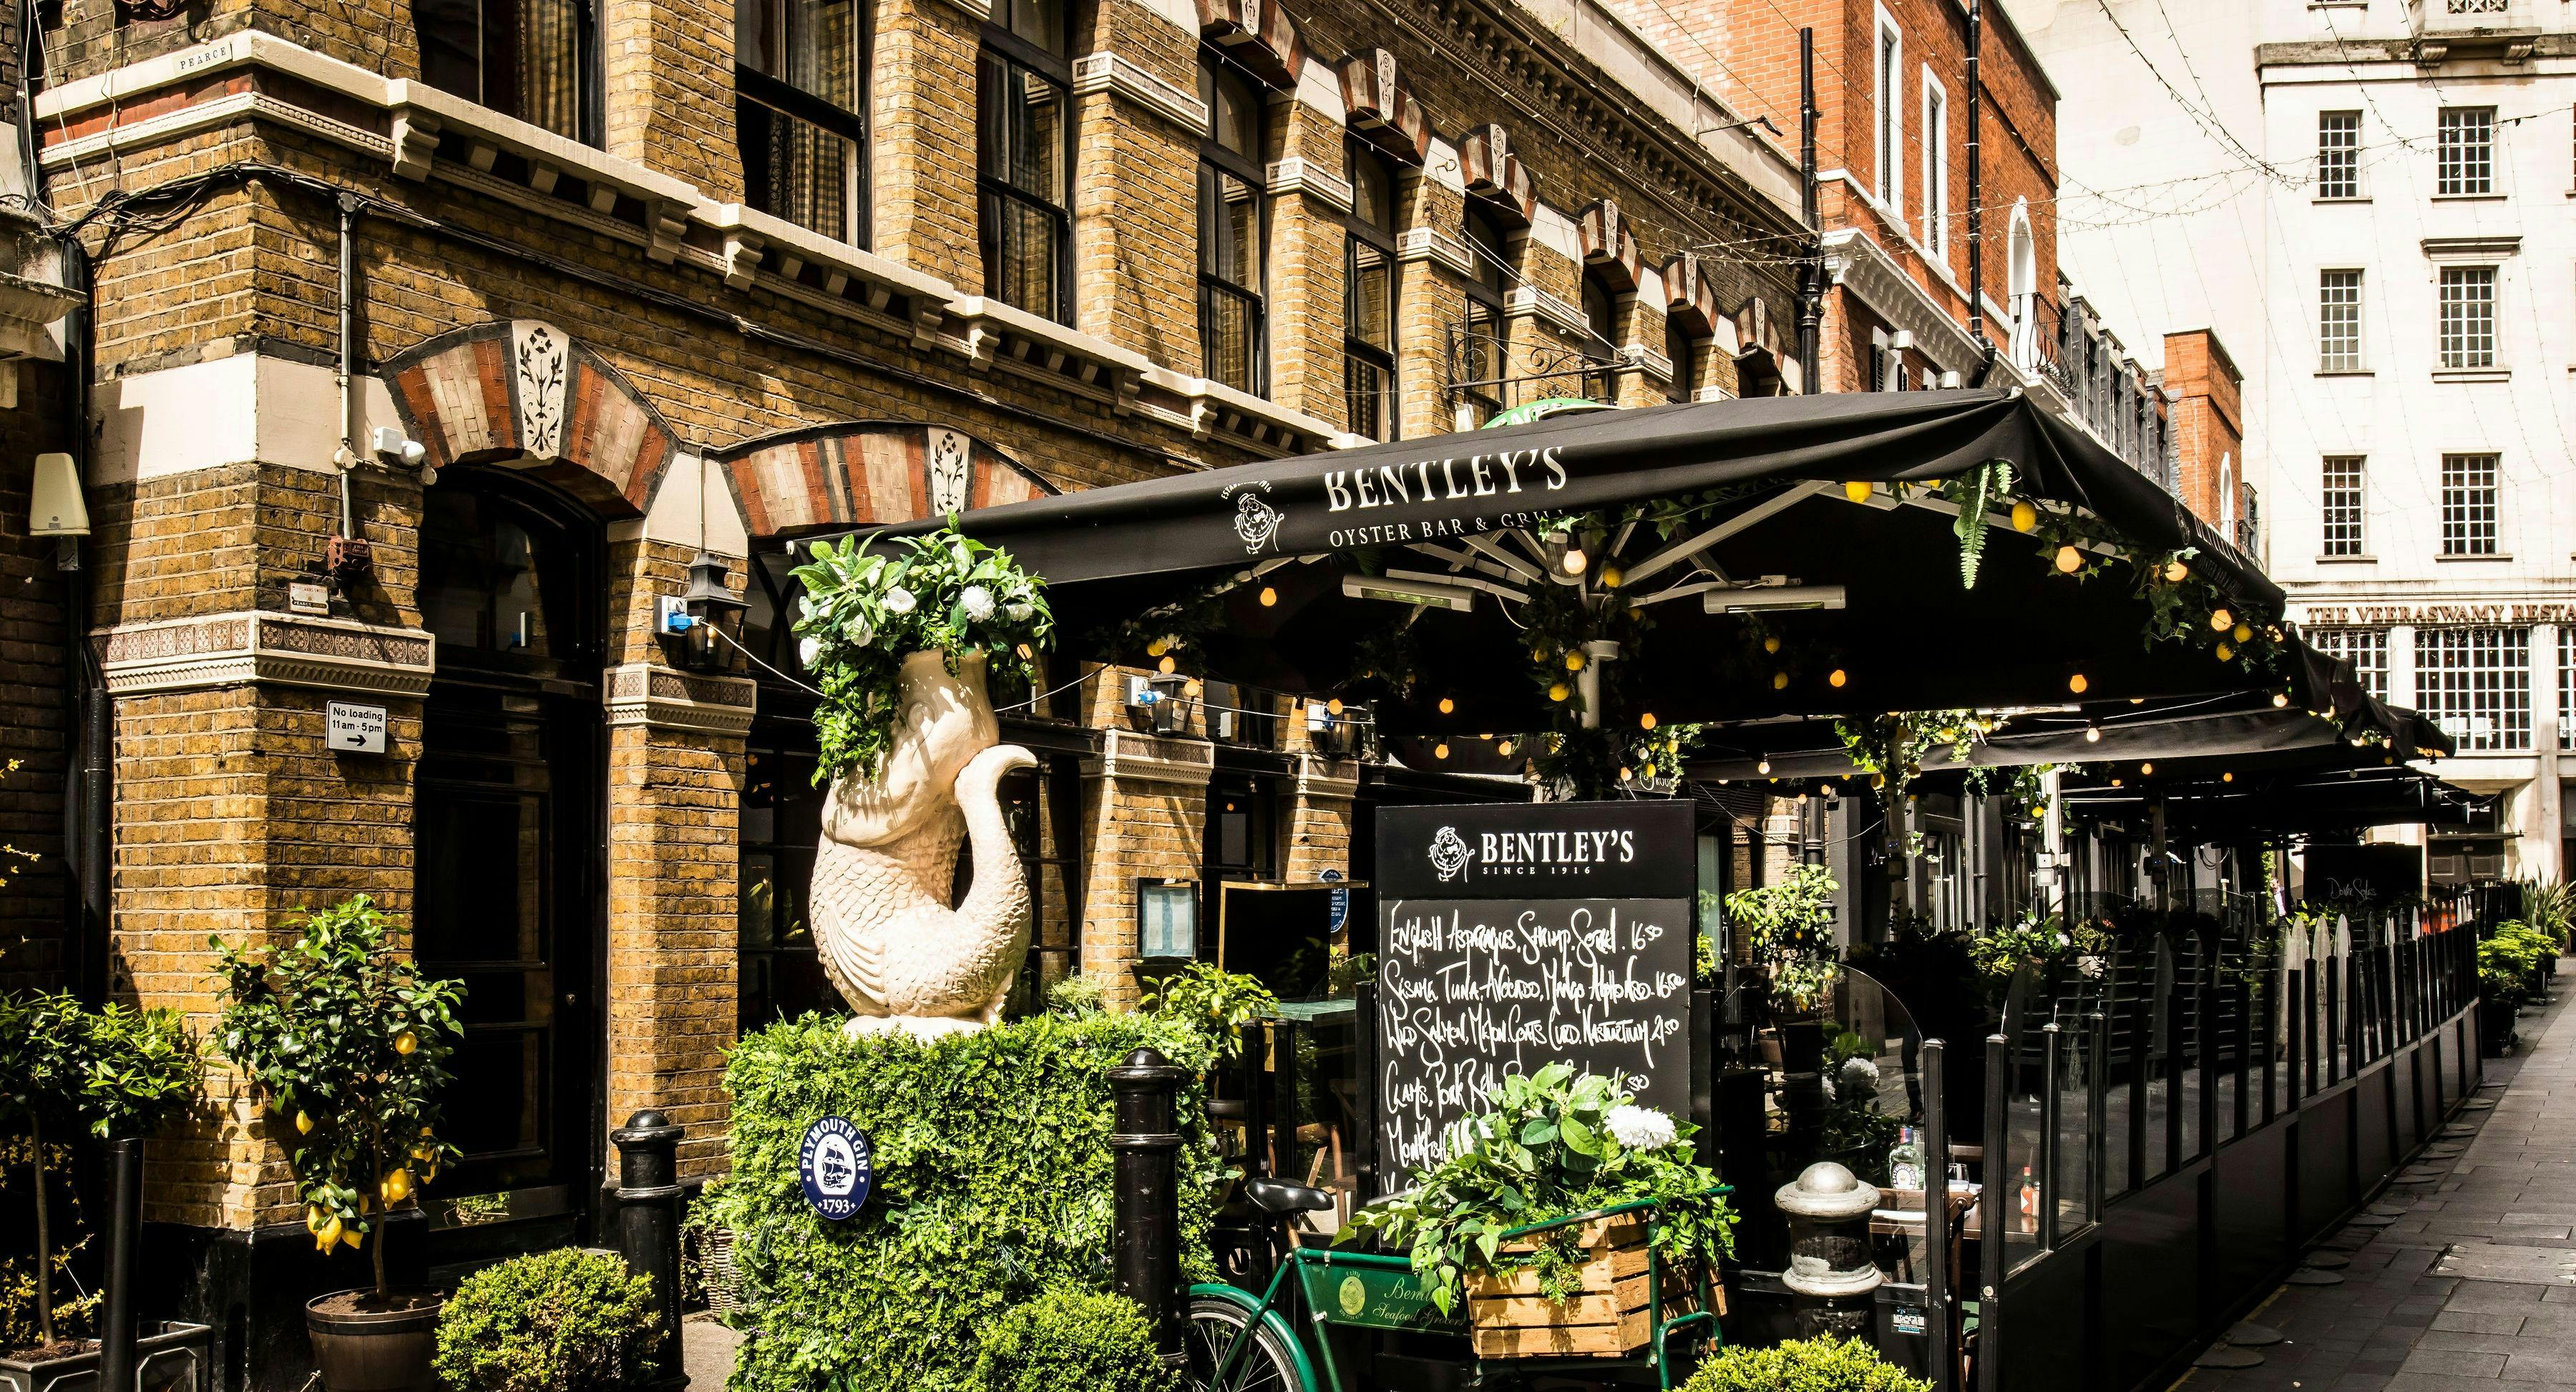 Photo of restaurant Bentley's Oyster Bar & Grill in Mayfair, London